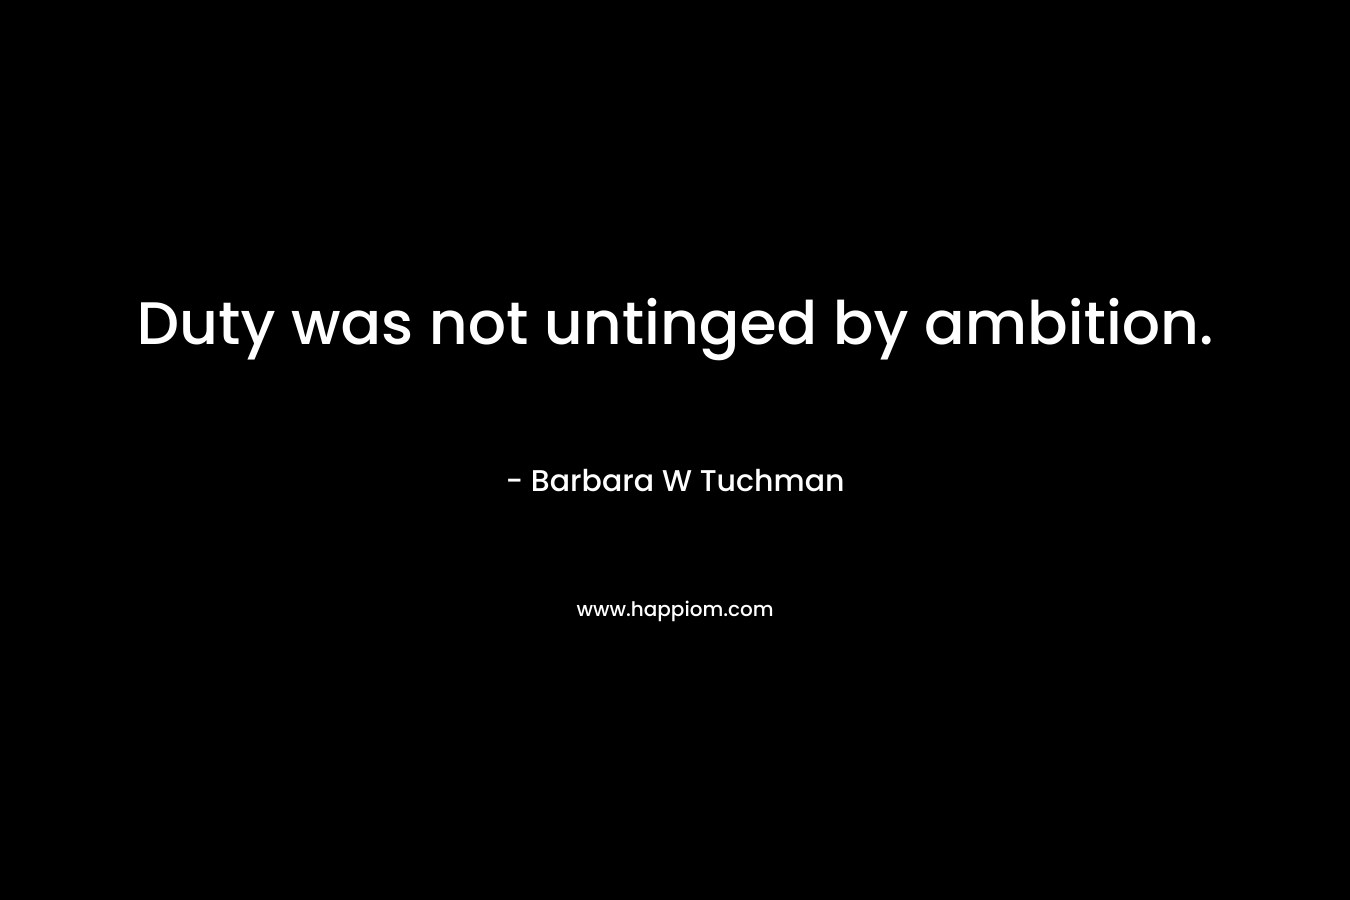 Duty was not untinged by ambition.